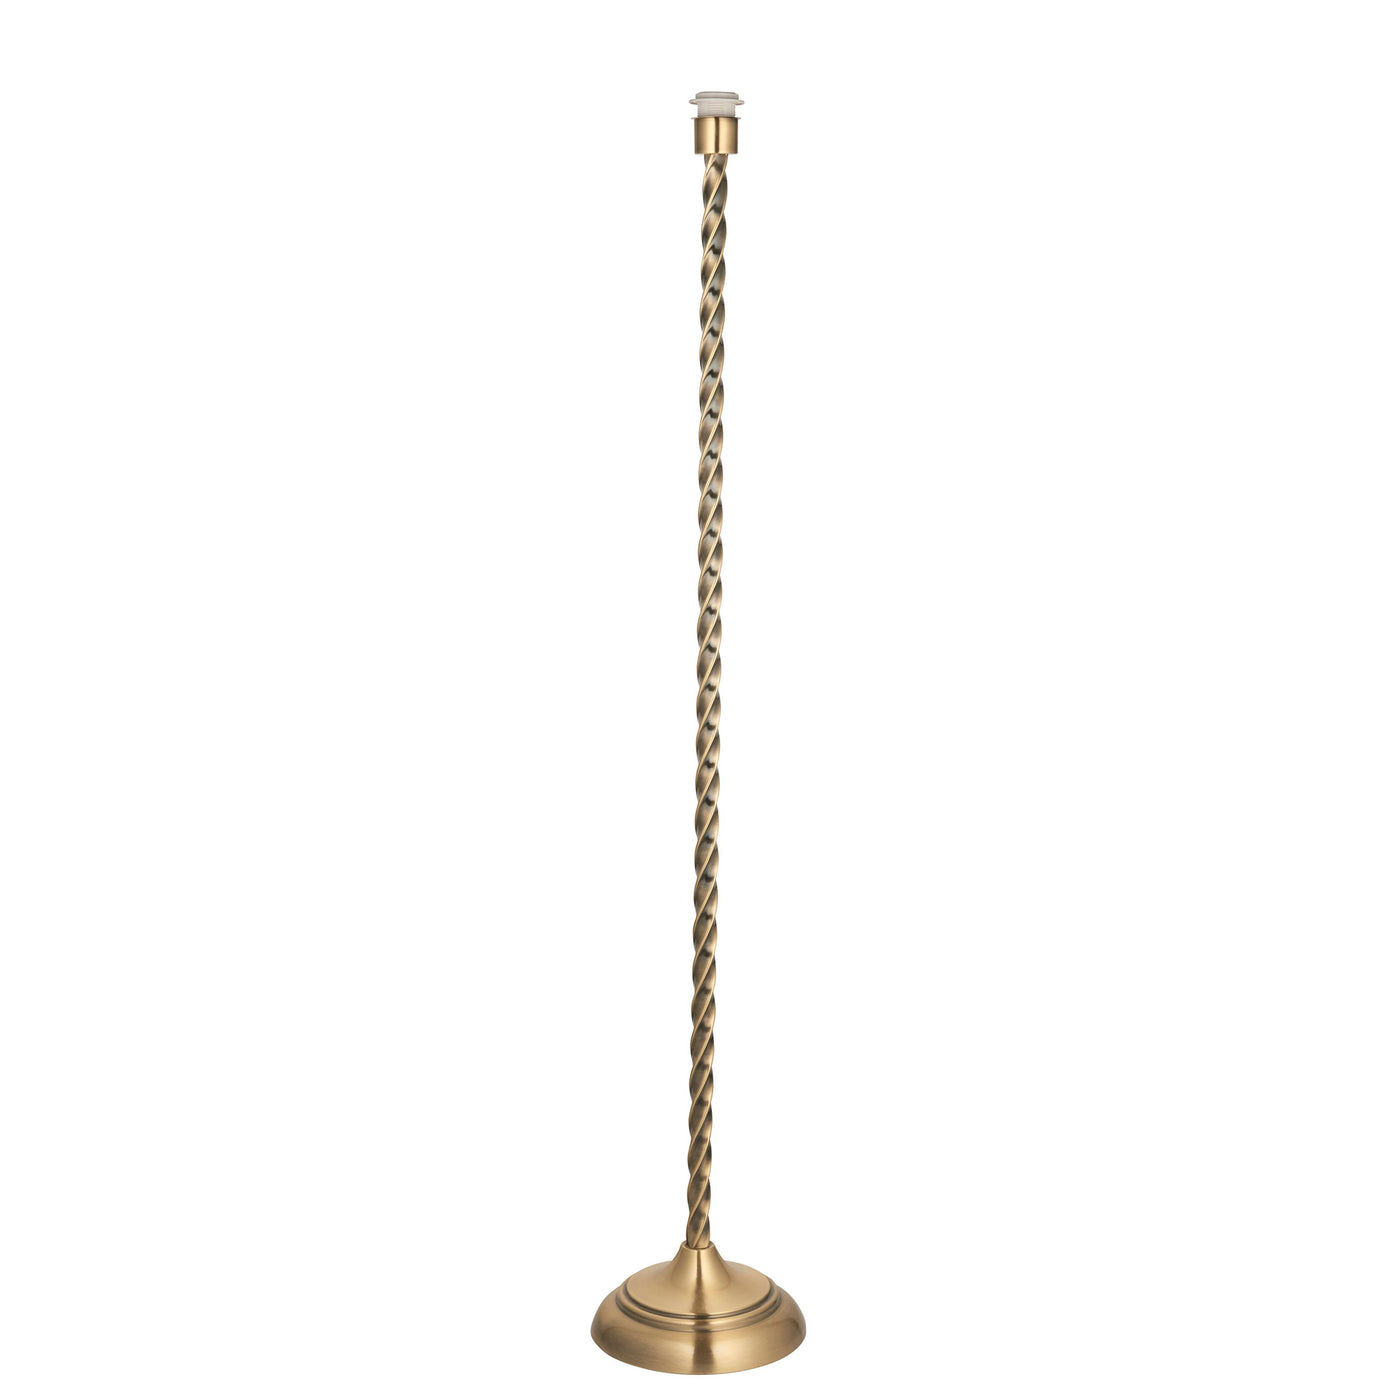 Gwithian Floor Lamp - Antique Brass